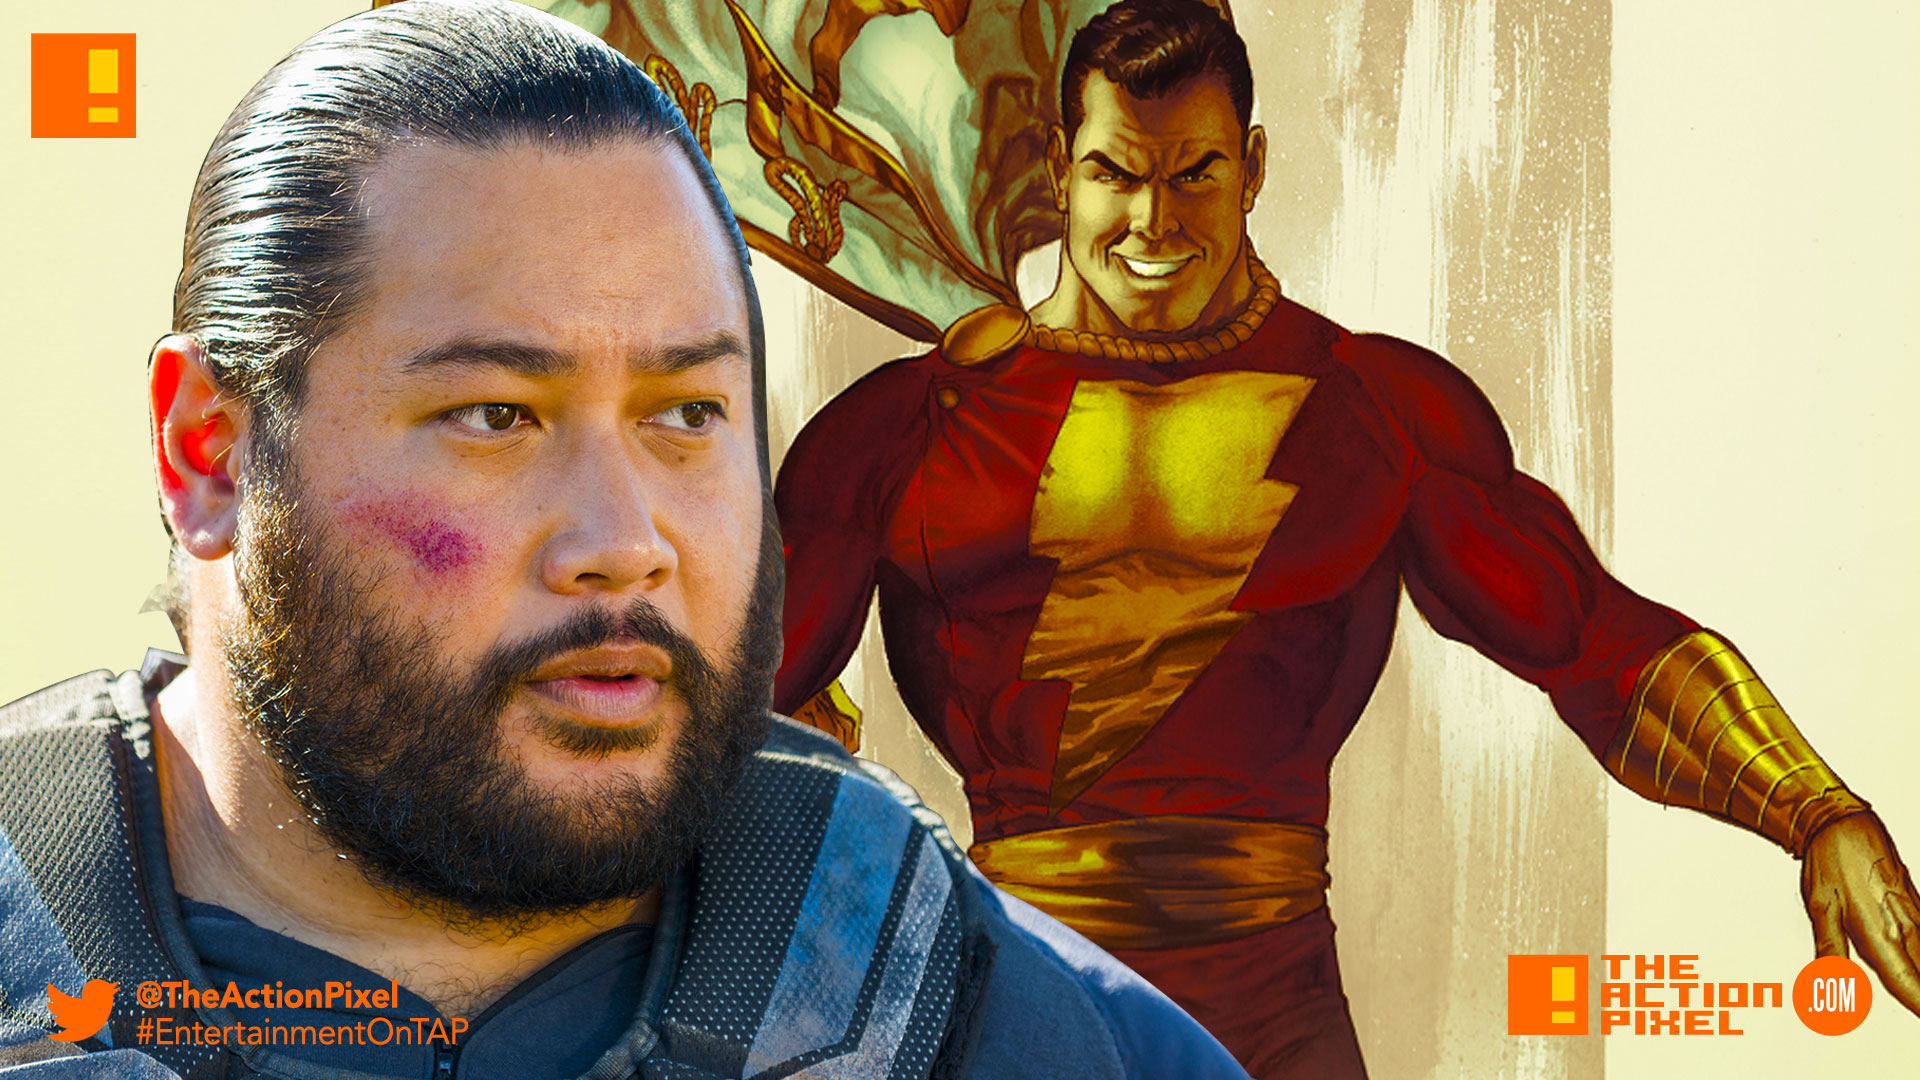 cooper andrews, shazam! ,shazam, the walking dead, jerry, billy batson, casting , dceu, dc comics, wb pictures, warner bros pictures, the action pixel, entertainment on tap,